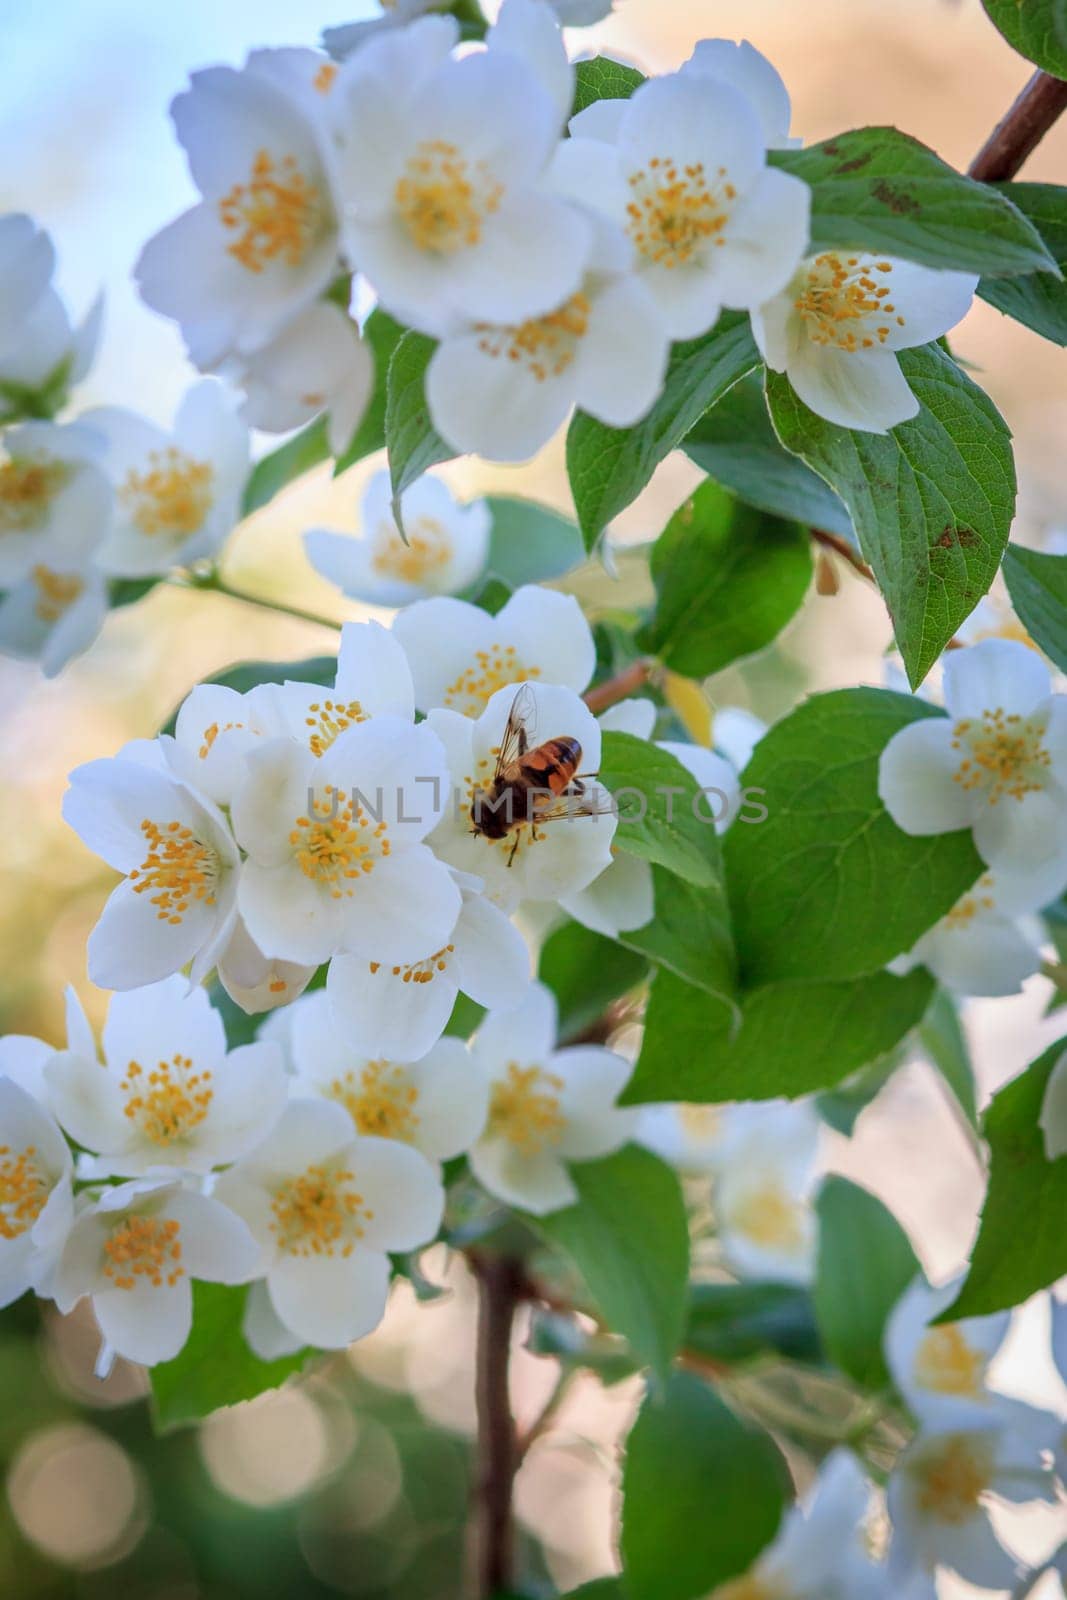 Blooming jasmine bush in sunny summer day. Jasmine flowers with a bee. Shallow depth of field.